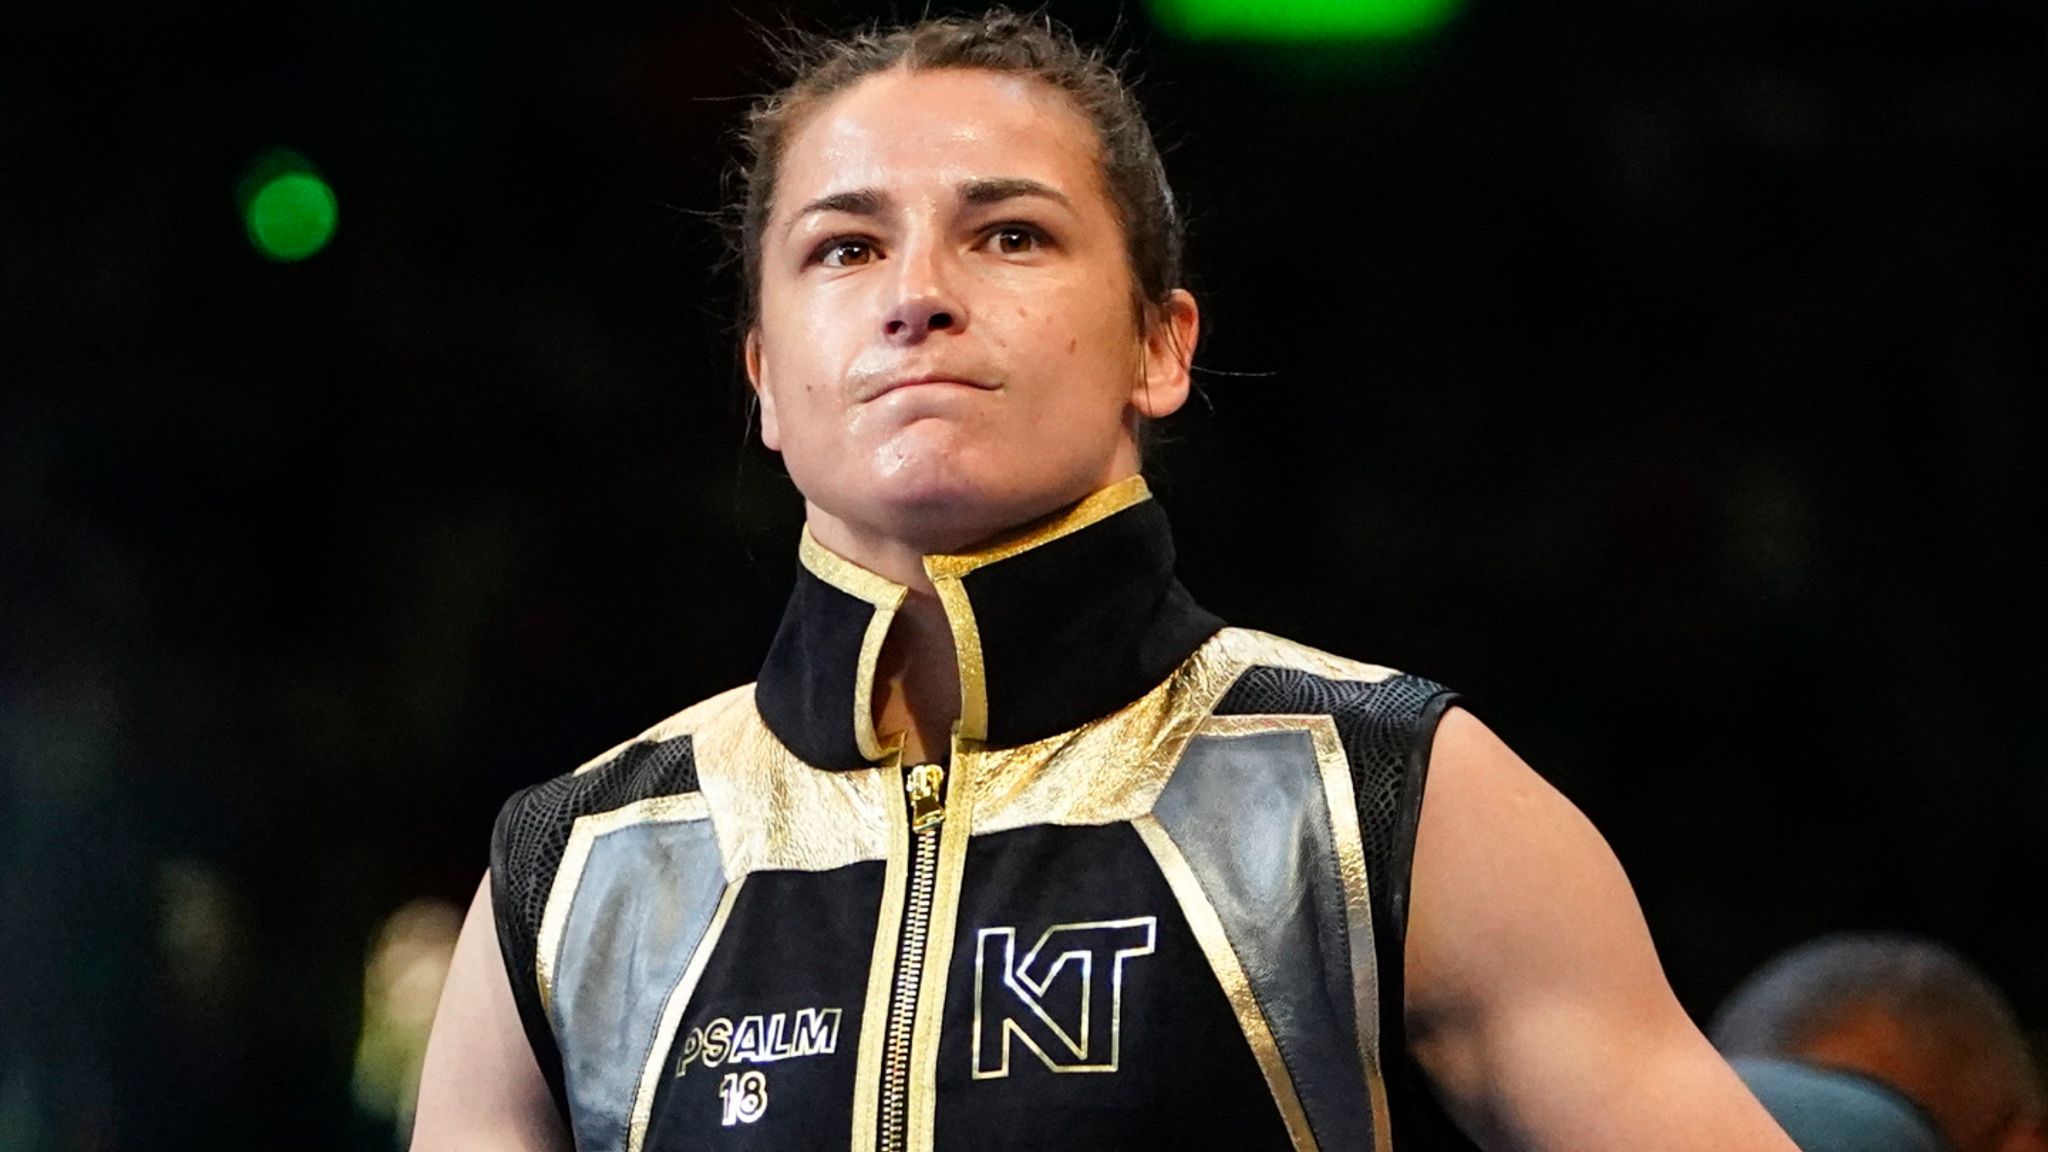 Katie Taylor Chantelle Cameron showdown the biggest challenge of my career Boxing News Sky Sports